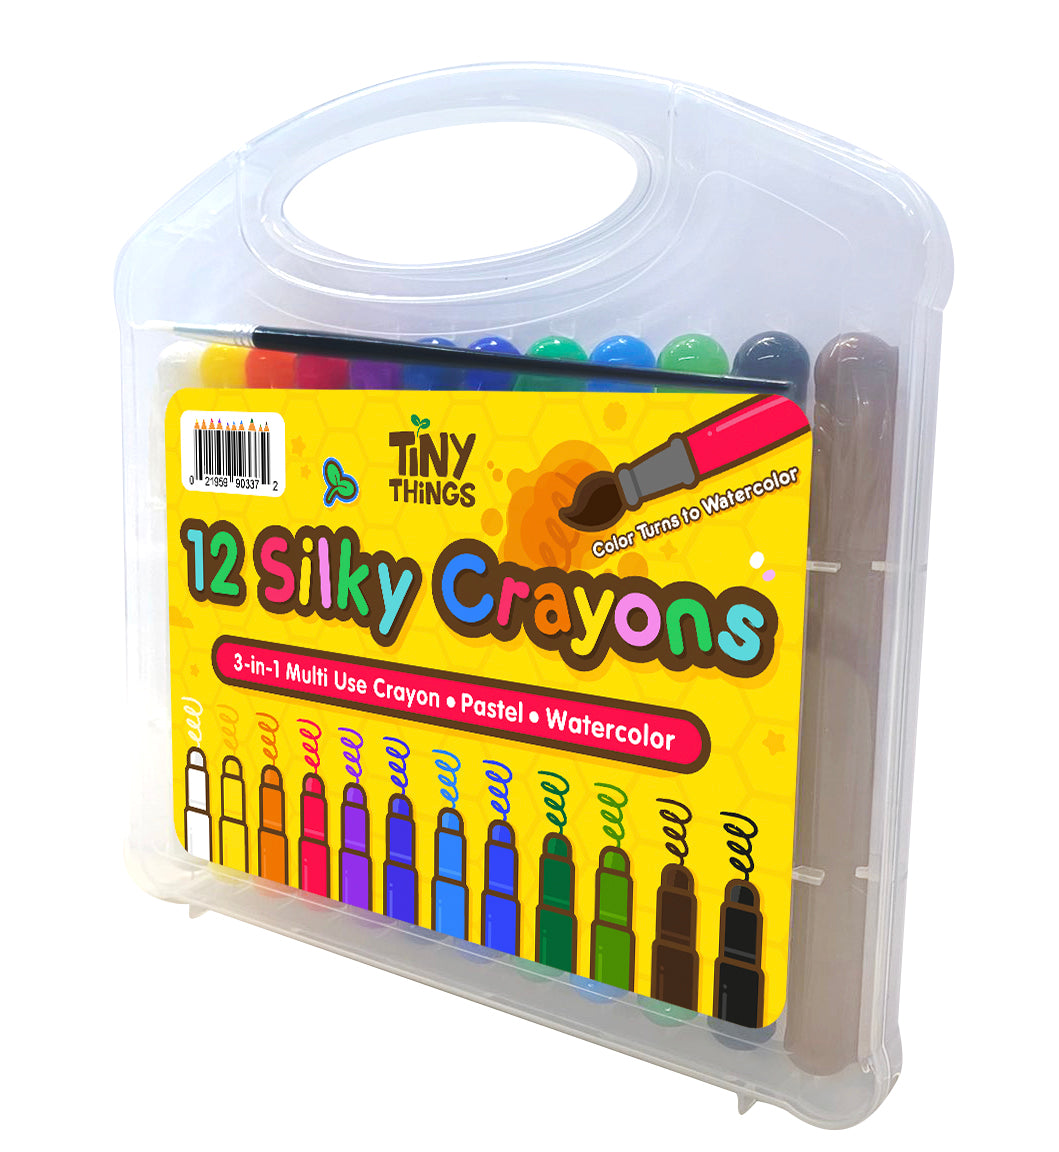 Tiny Things Silky Crayons (12 Colors)